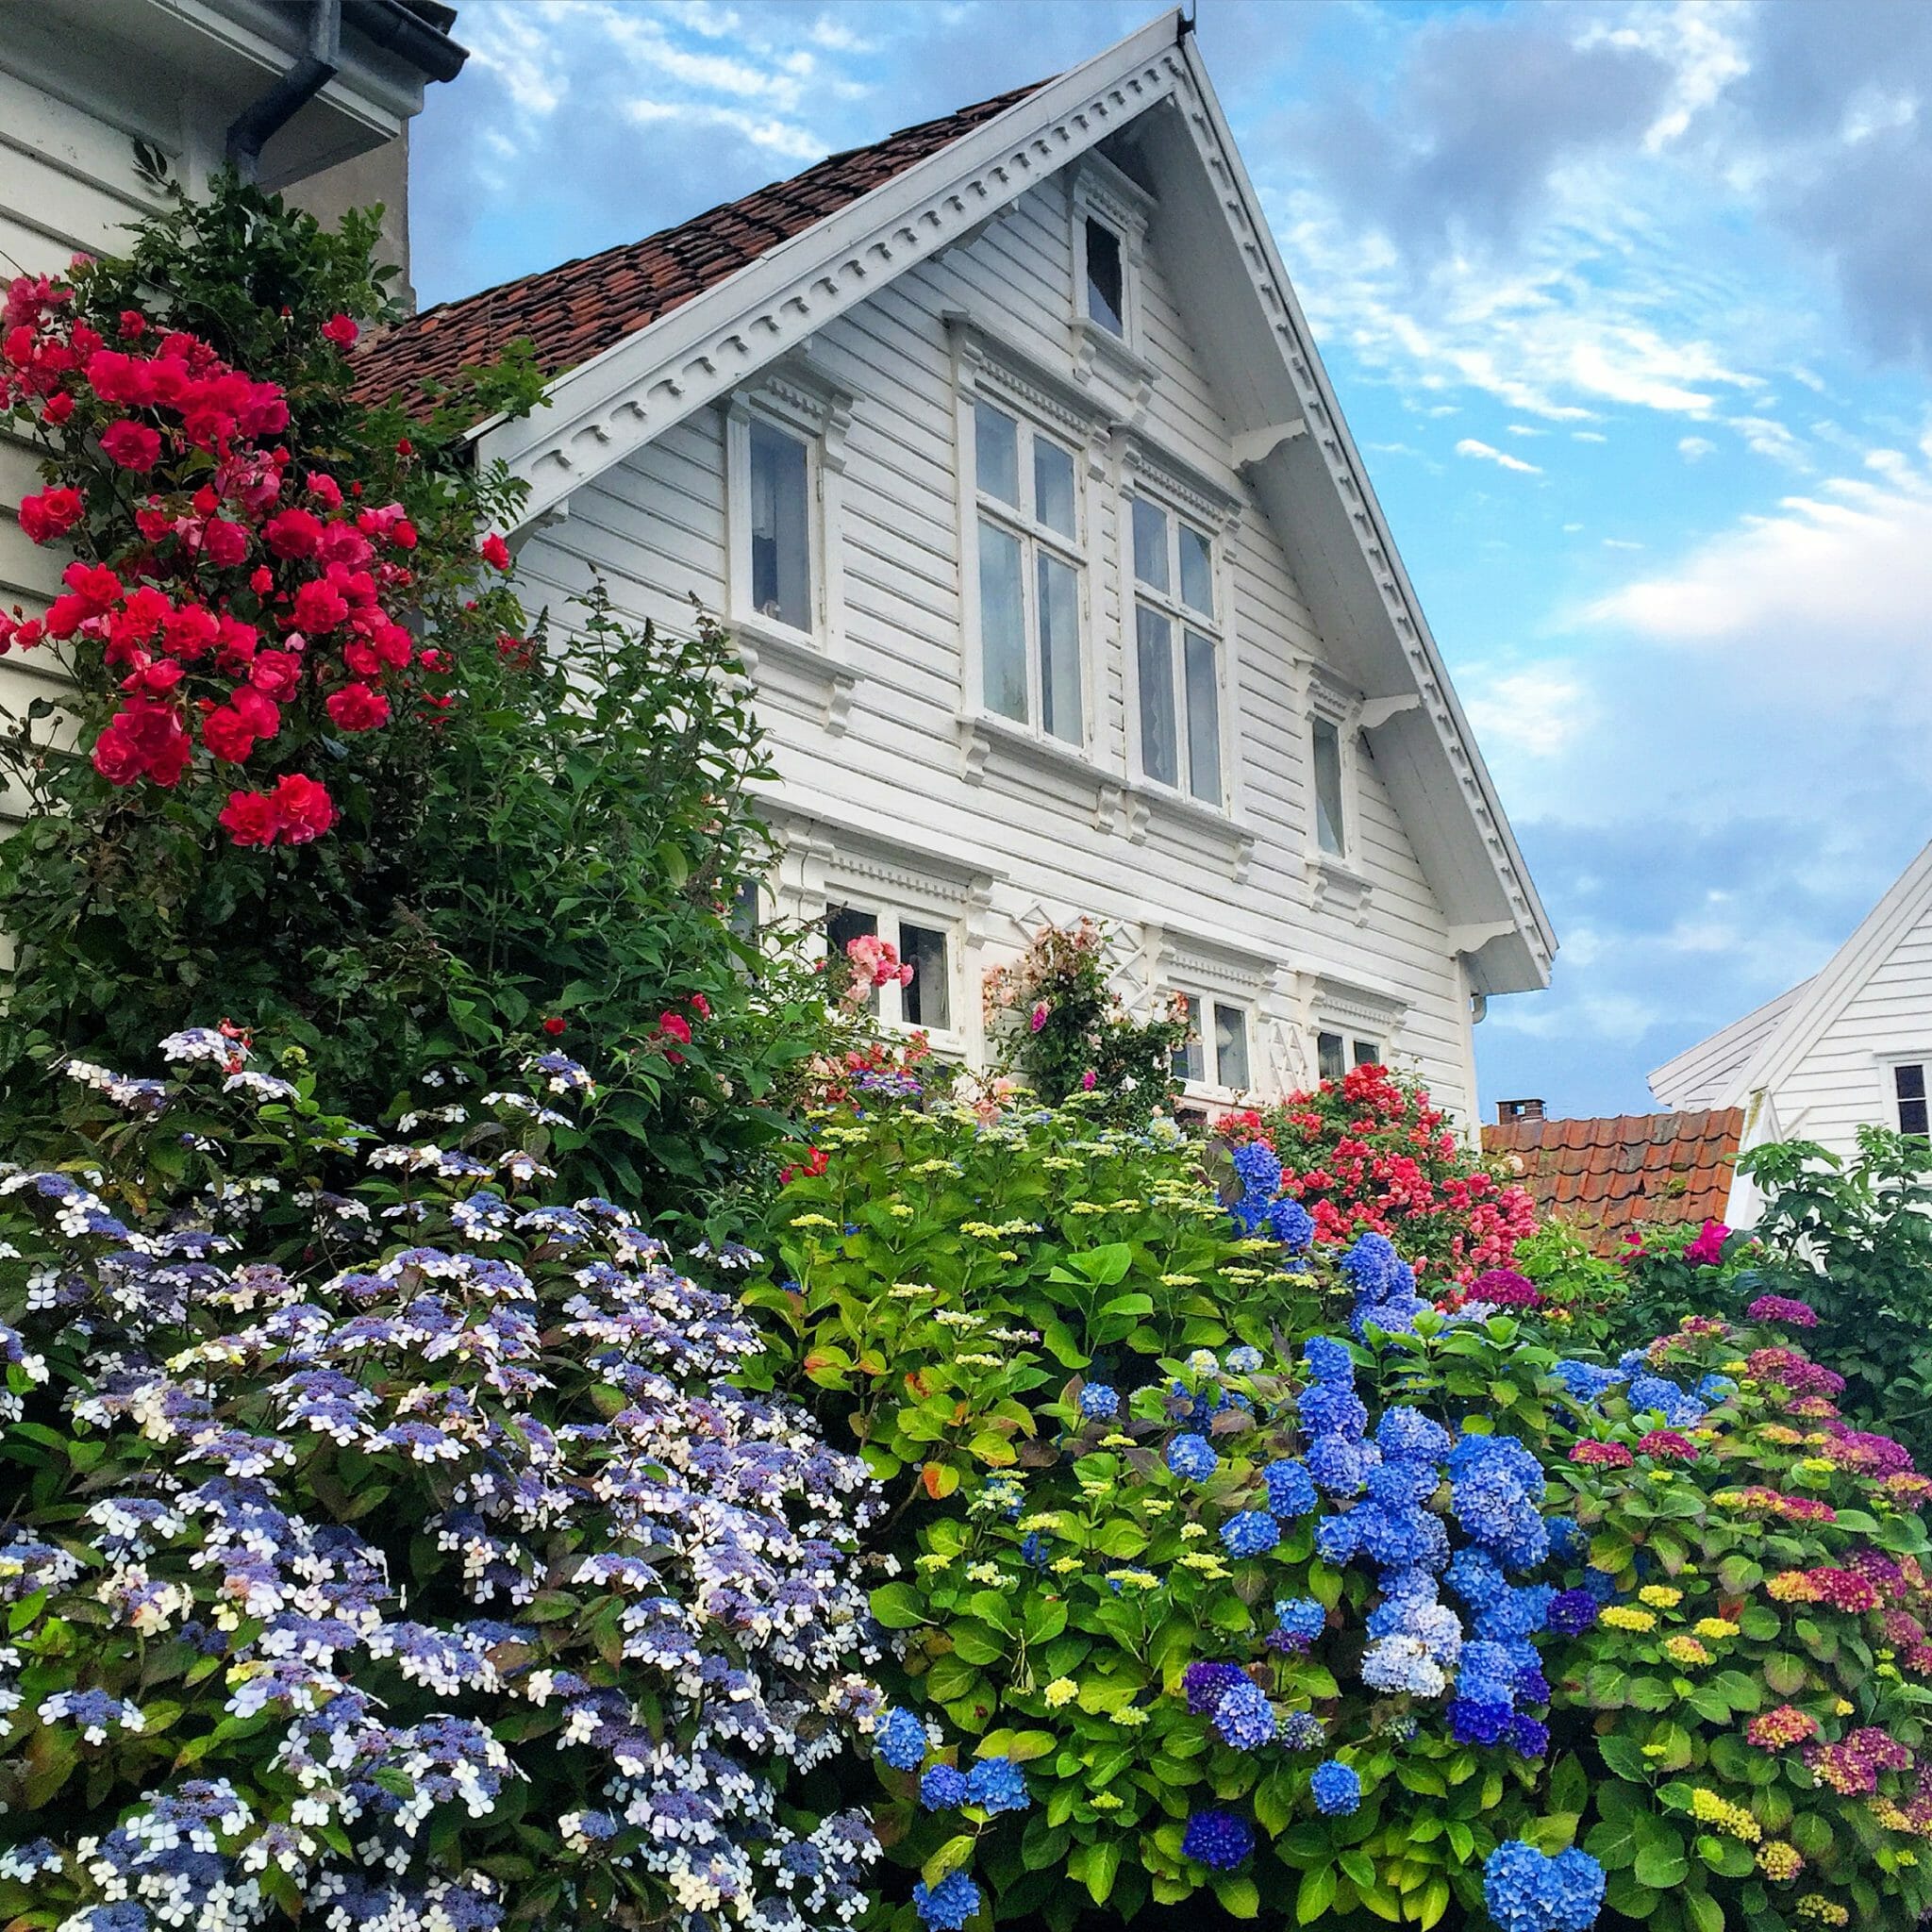 Flowers of different colours and a whitewashed house in Stavanger, Norway